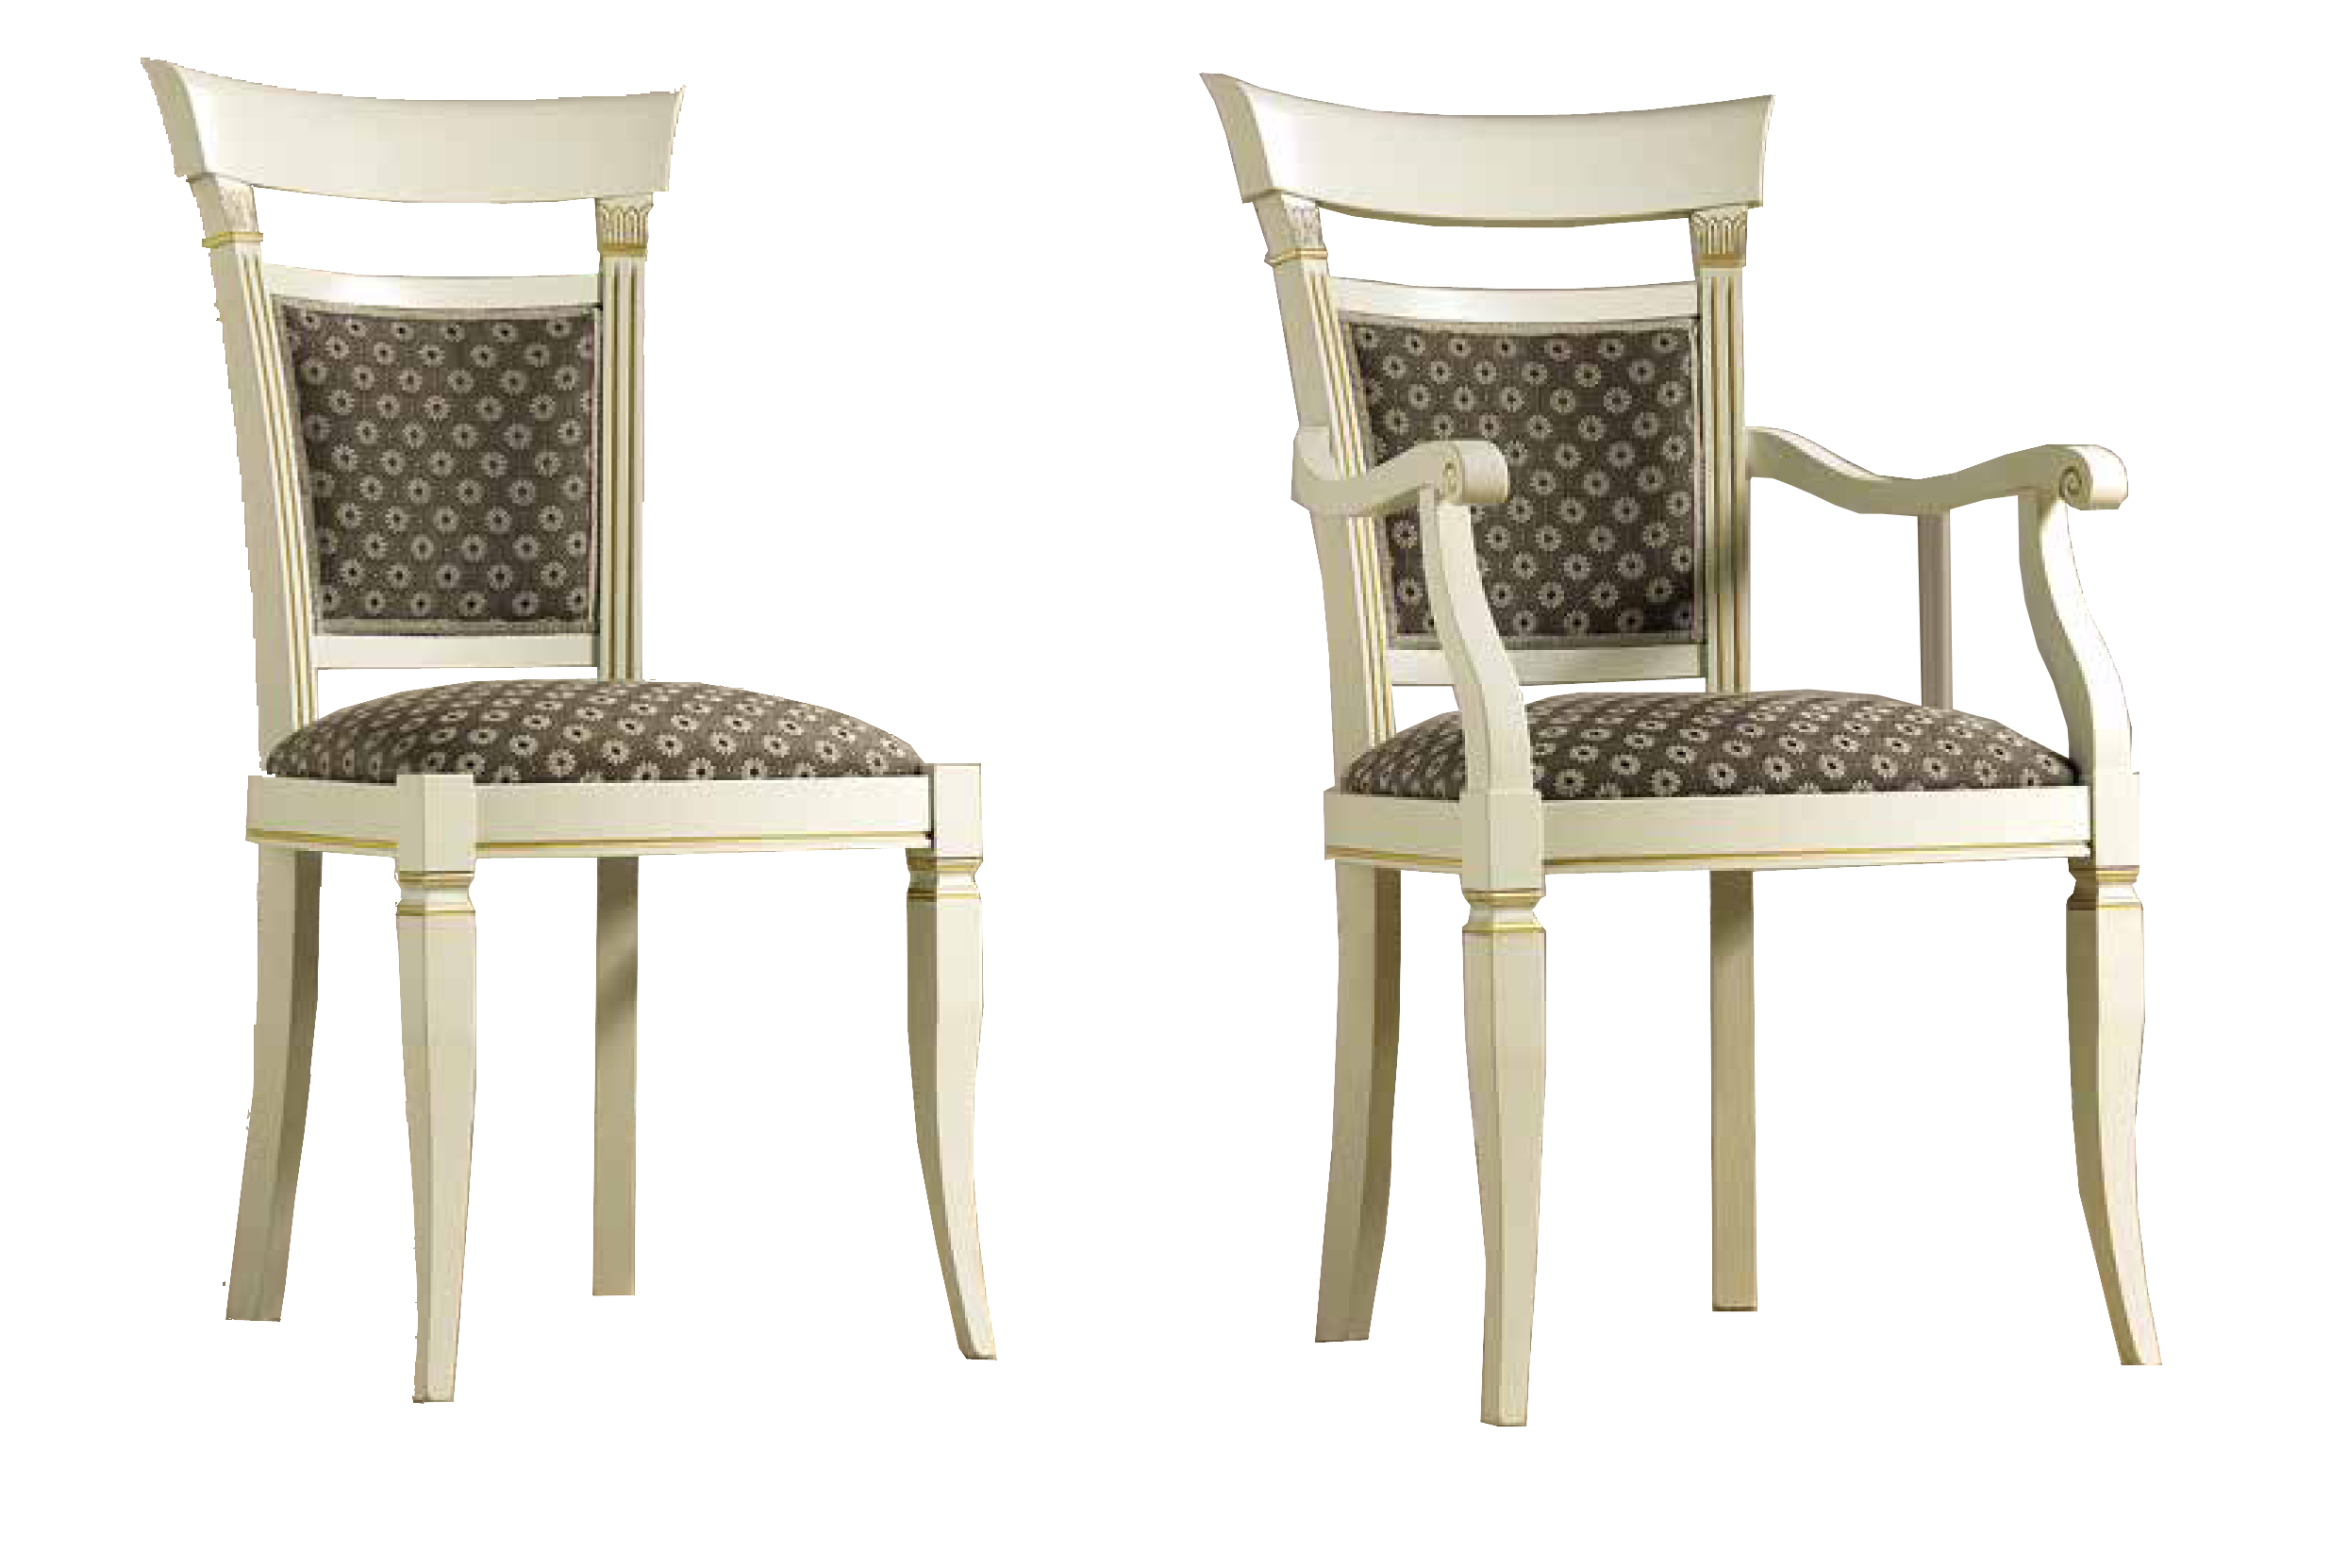 Clearance Bedroom Treviso Chairs White Ash